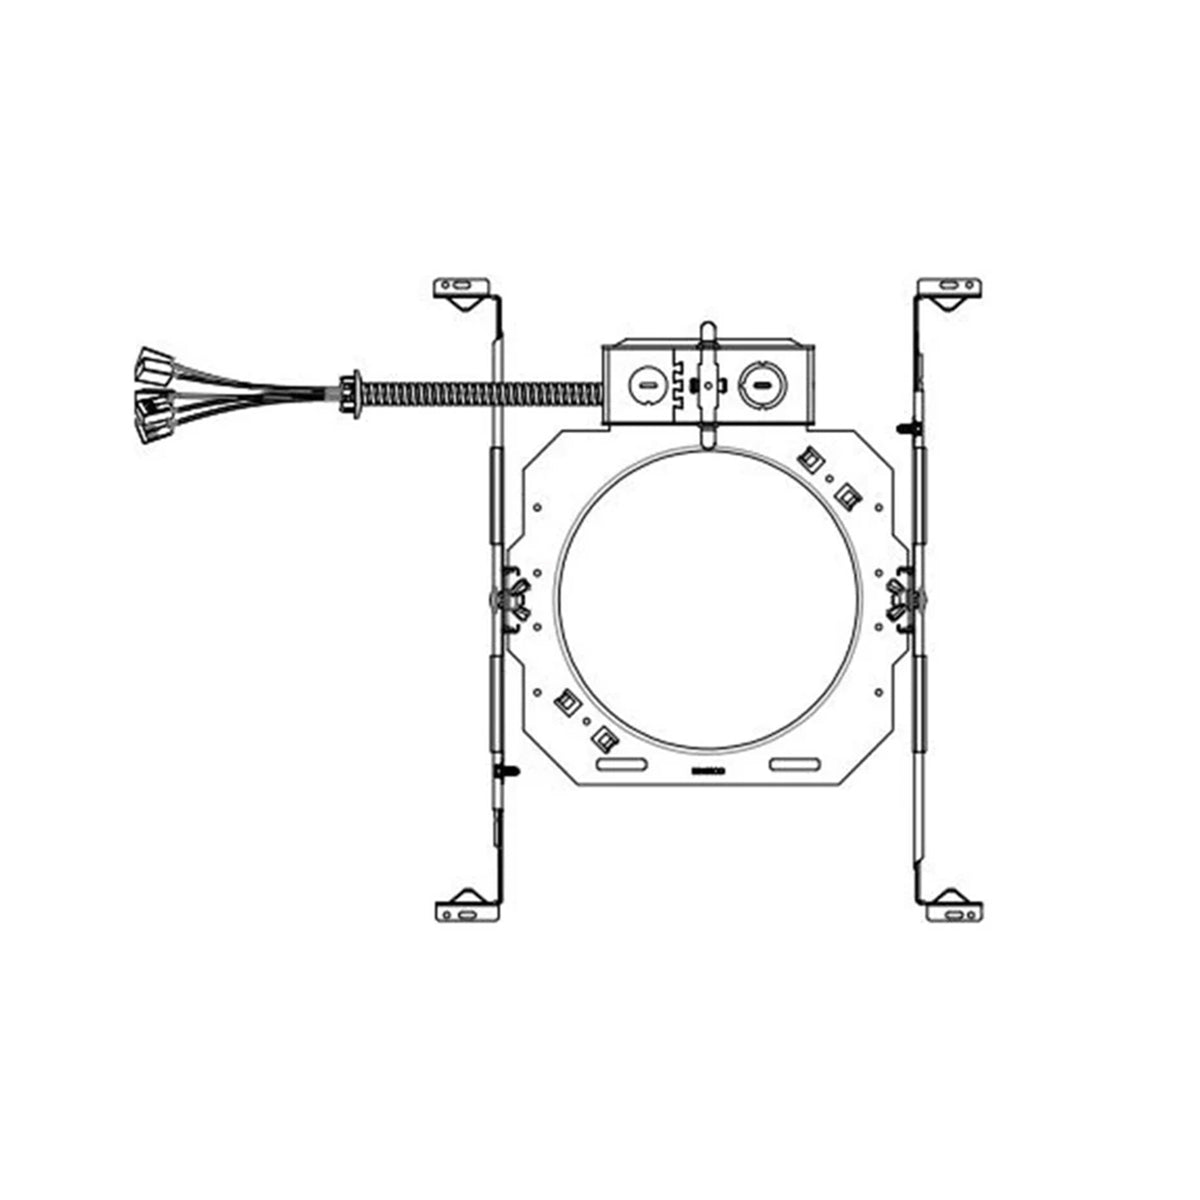 LBR 6 in. Round Plaster Frame with J-box and 18" Conduit